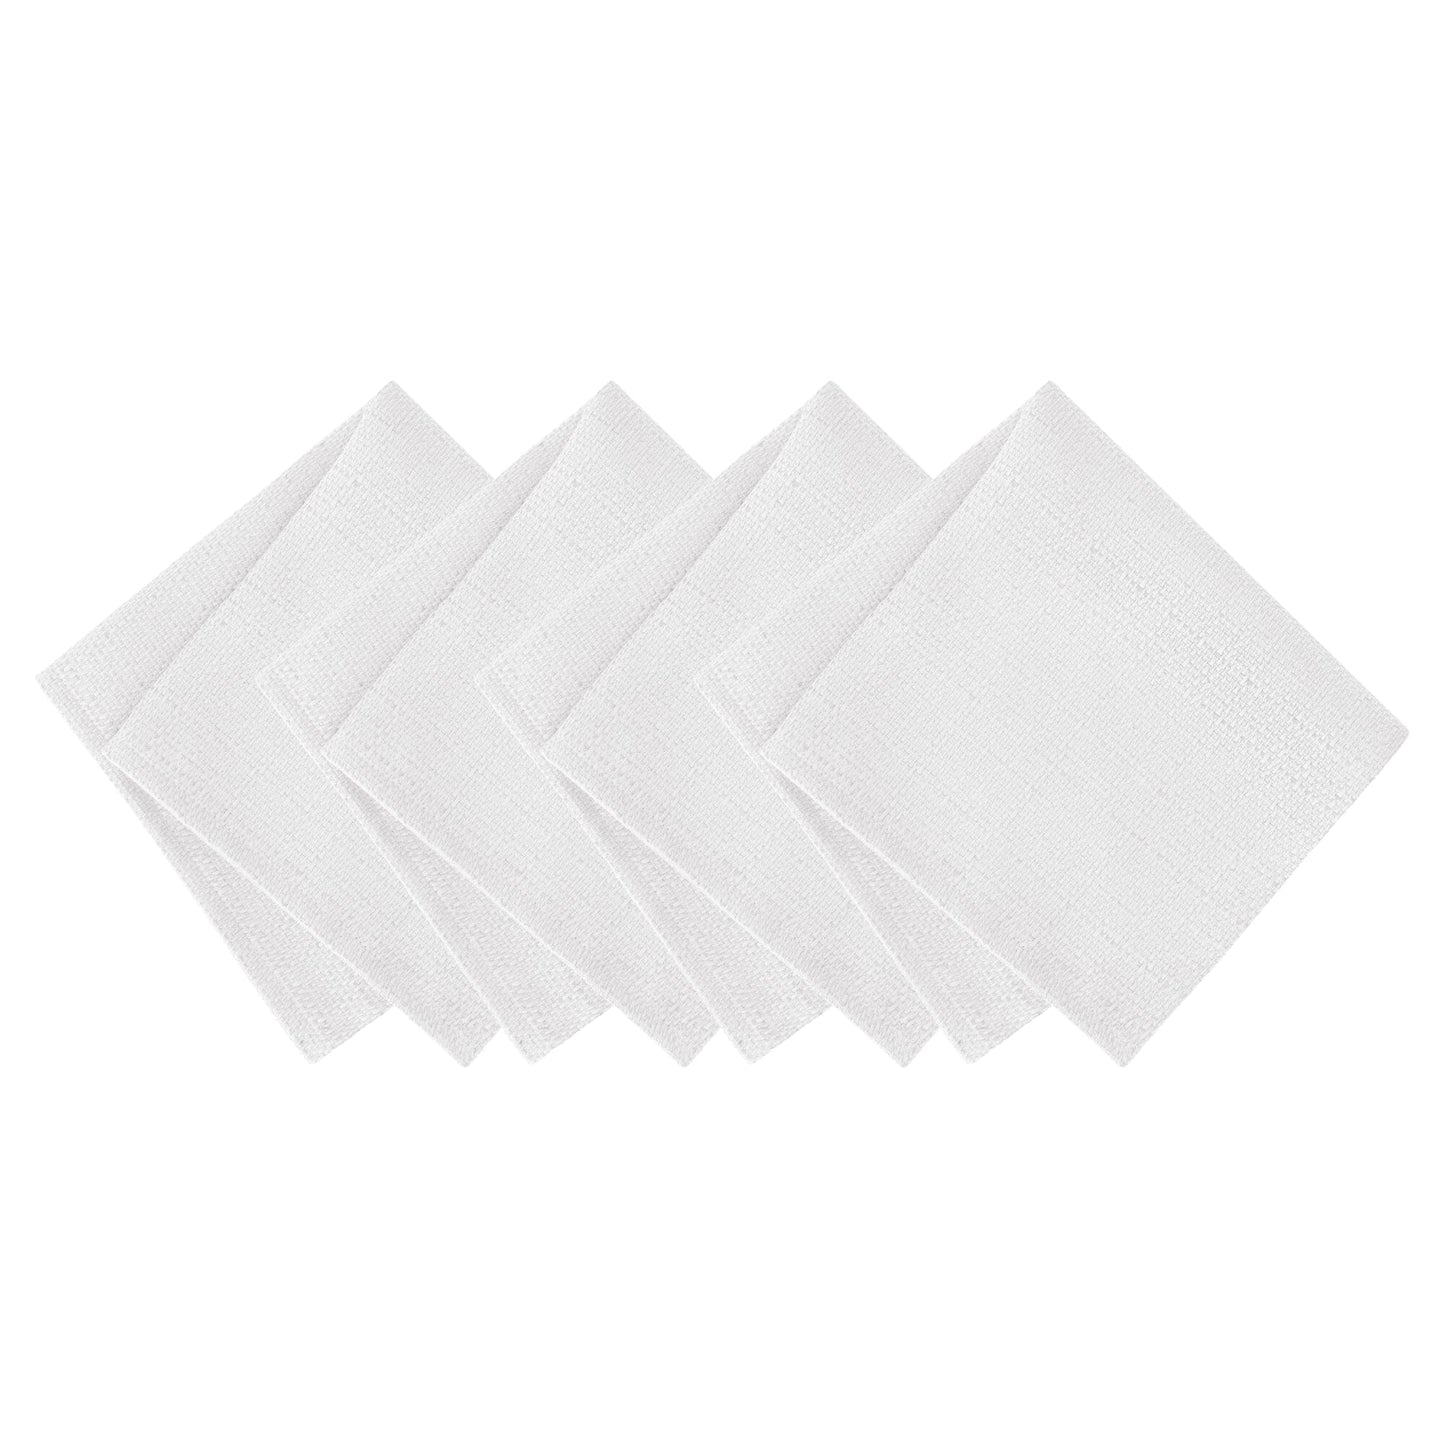 Laurel Solid Texture Water and Stain Resistant Napkins, Set of 4